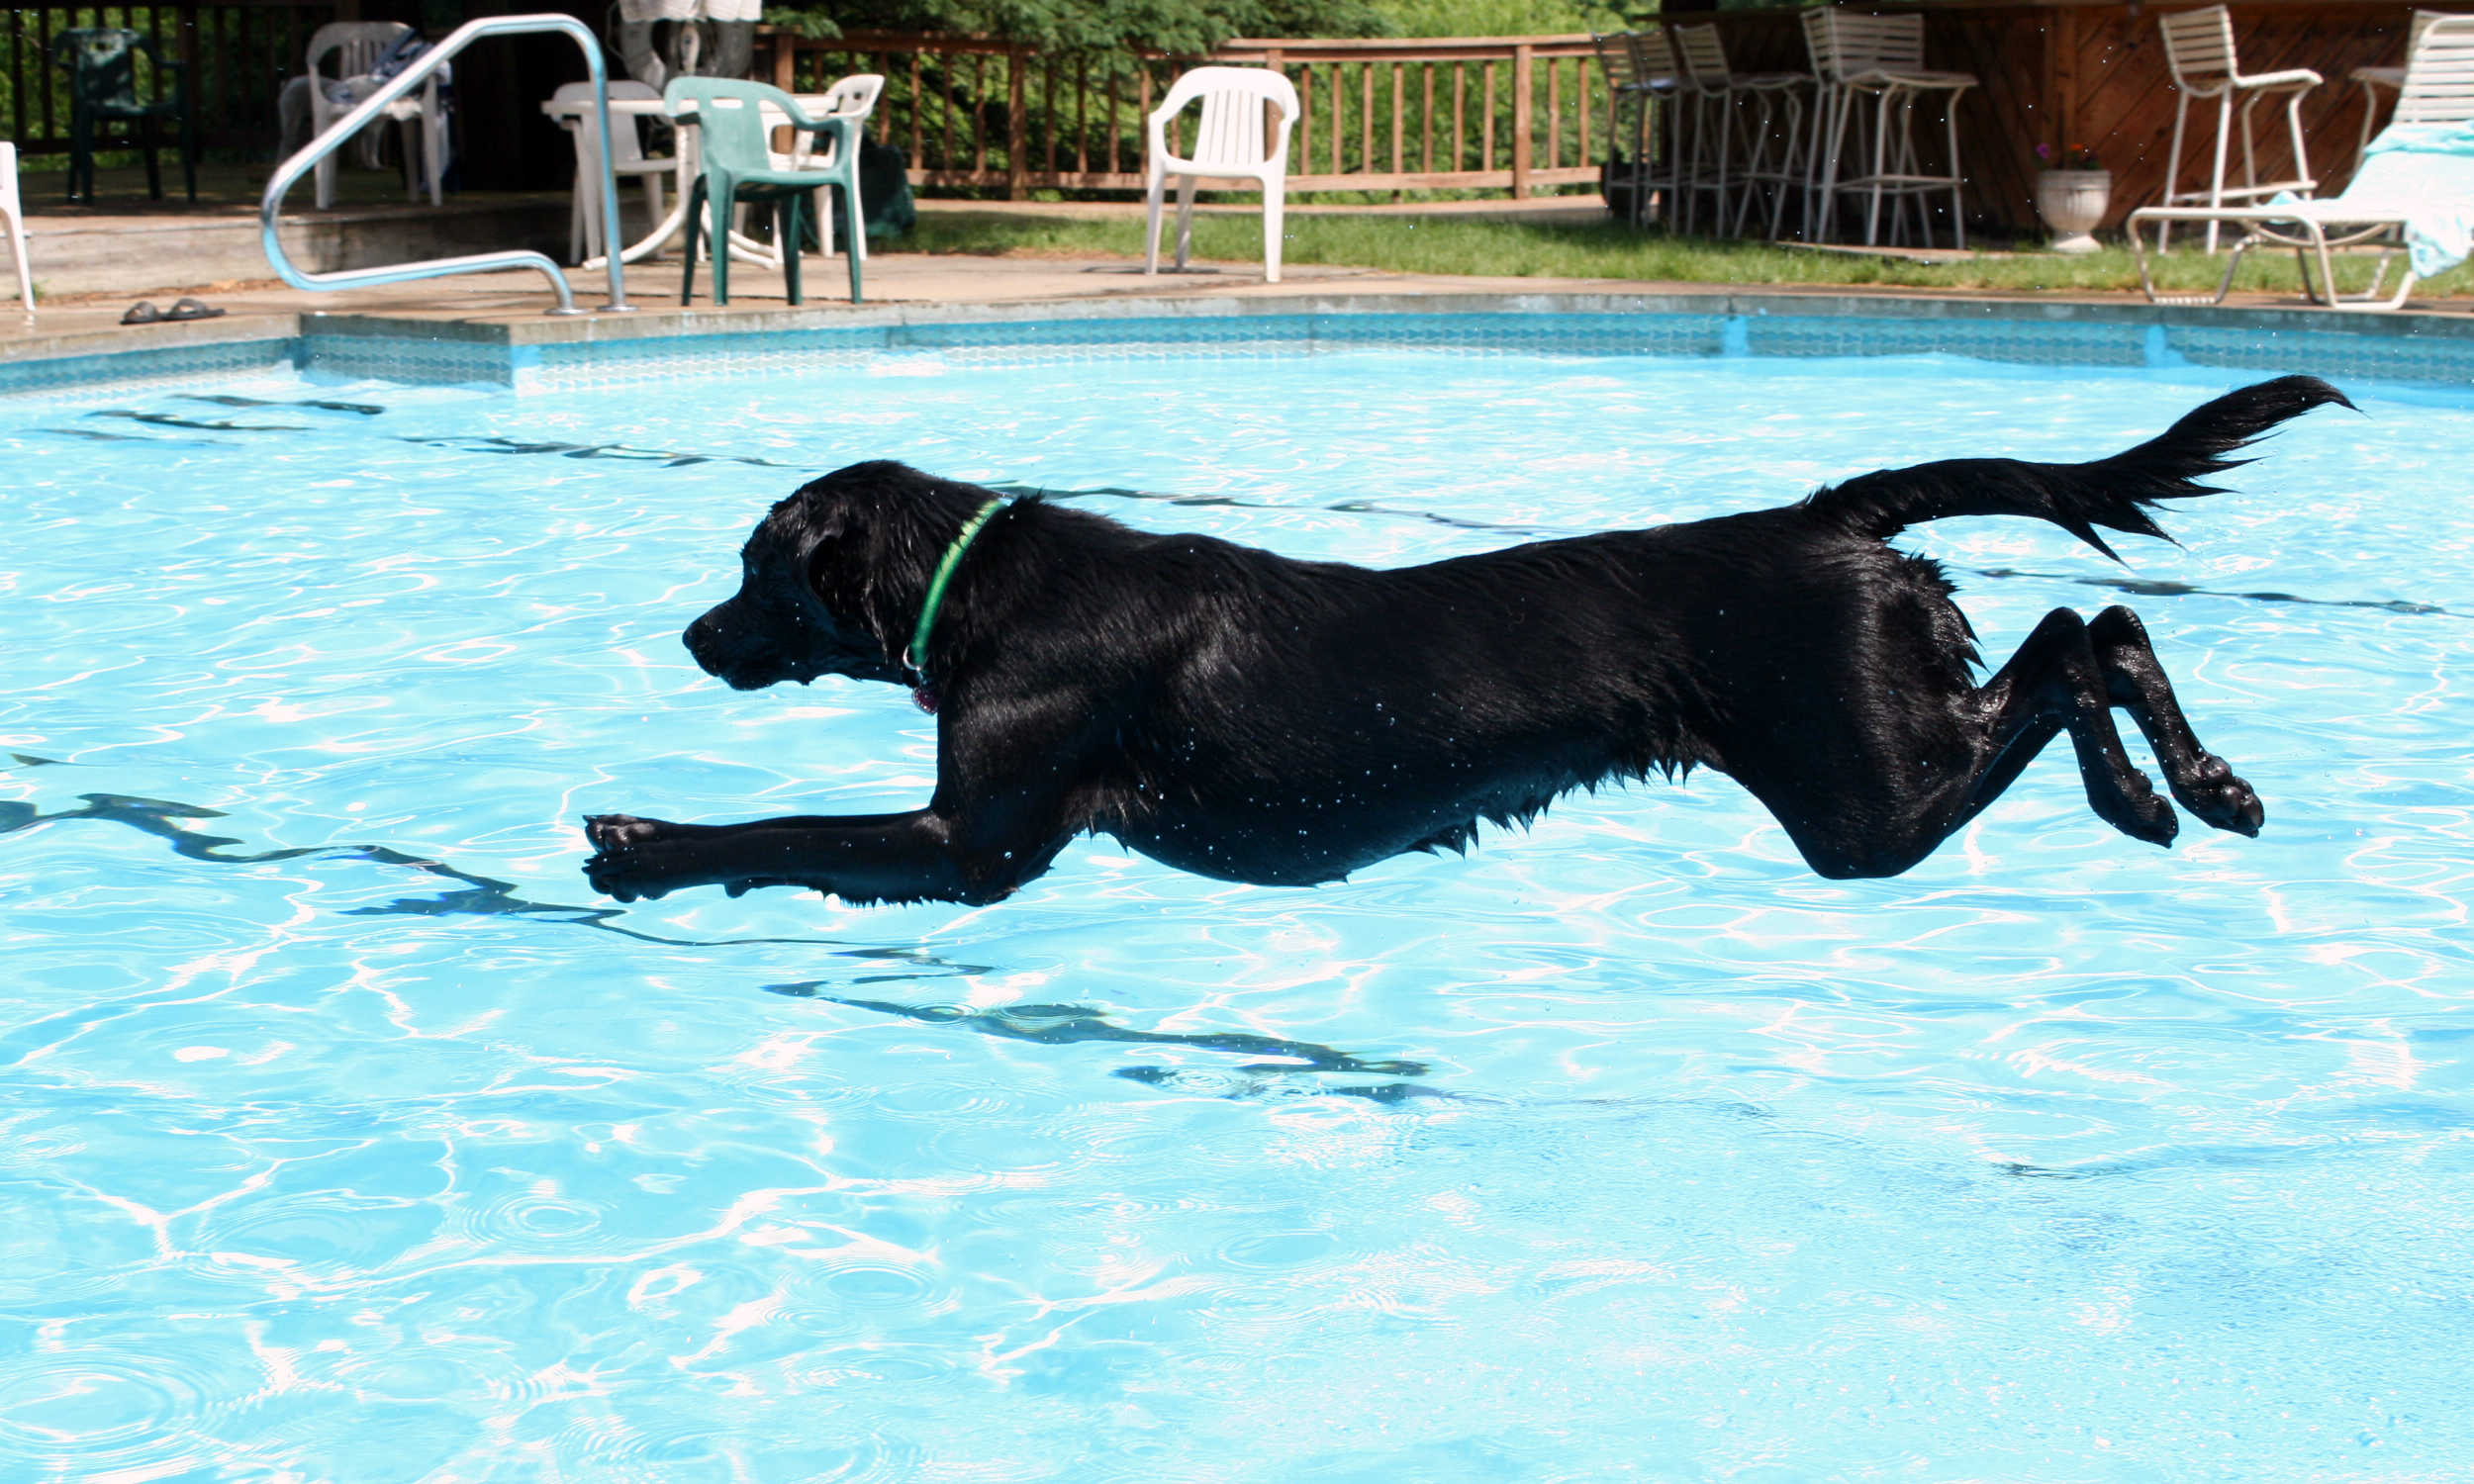 Leaping labrador! The pool is always open at Canine Camp Getaway.